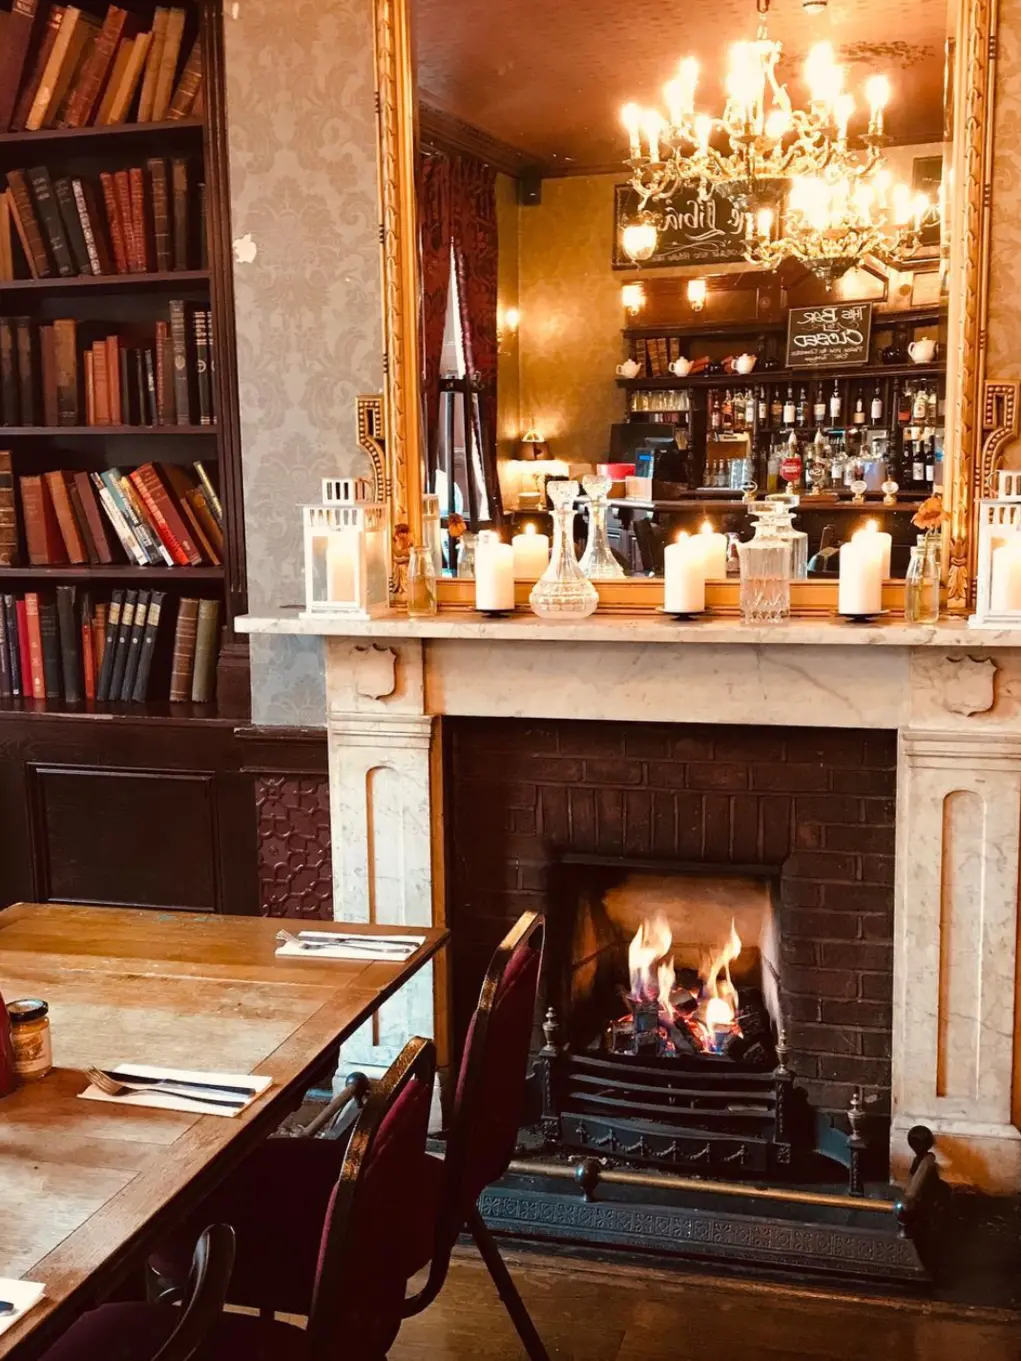 Wooden table in pub set for Sunday lunch in front of a open fire